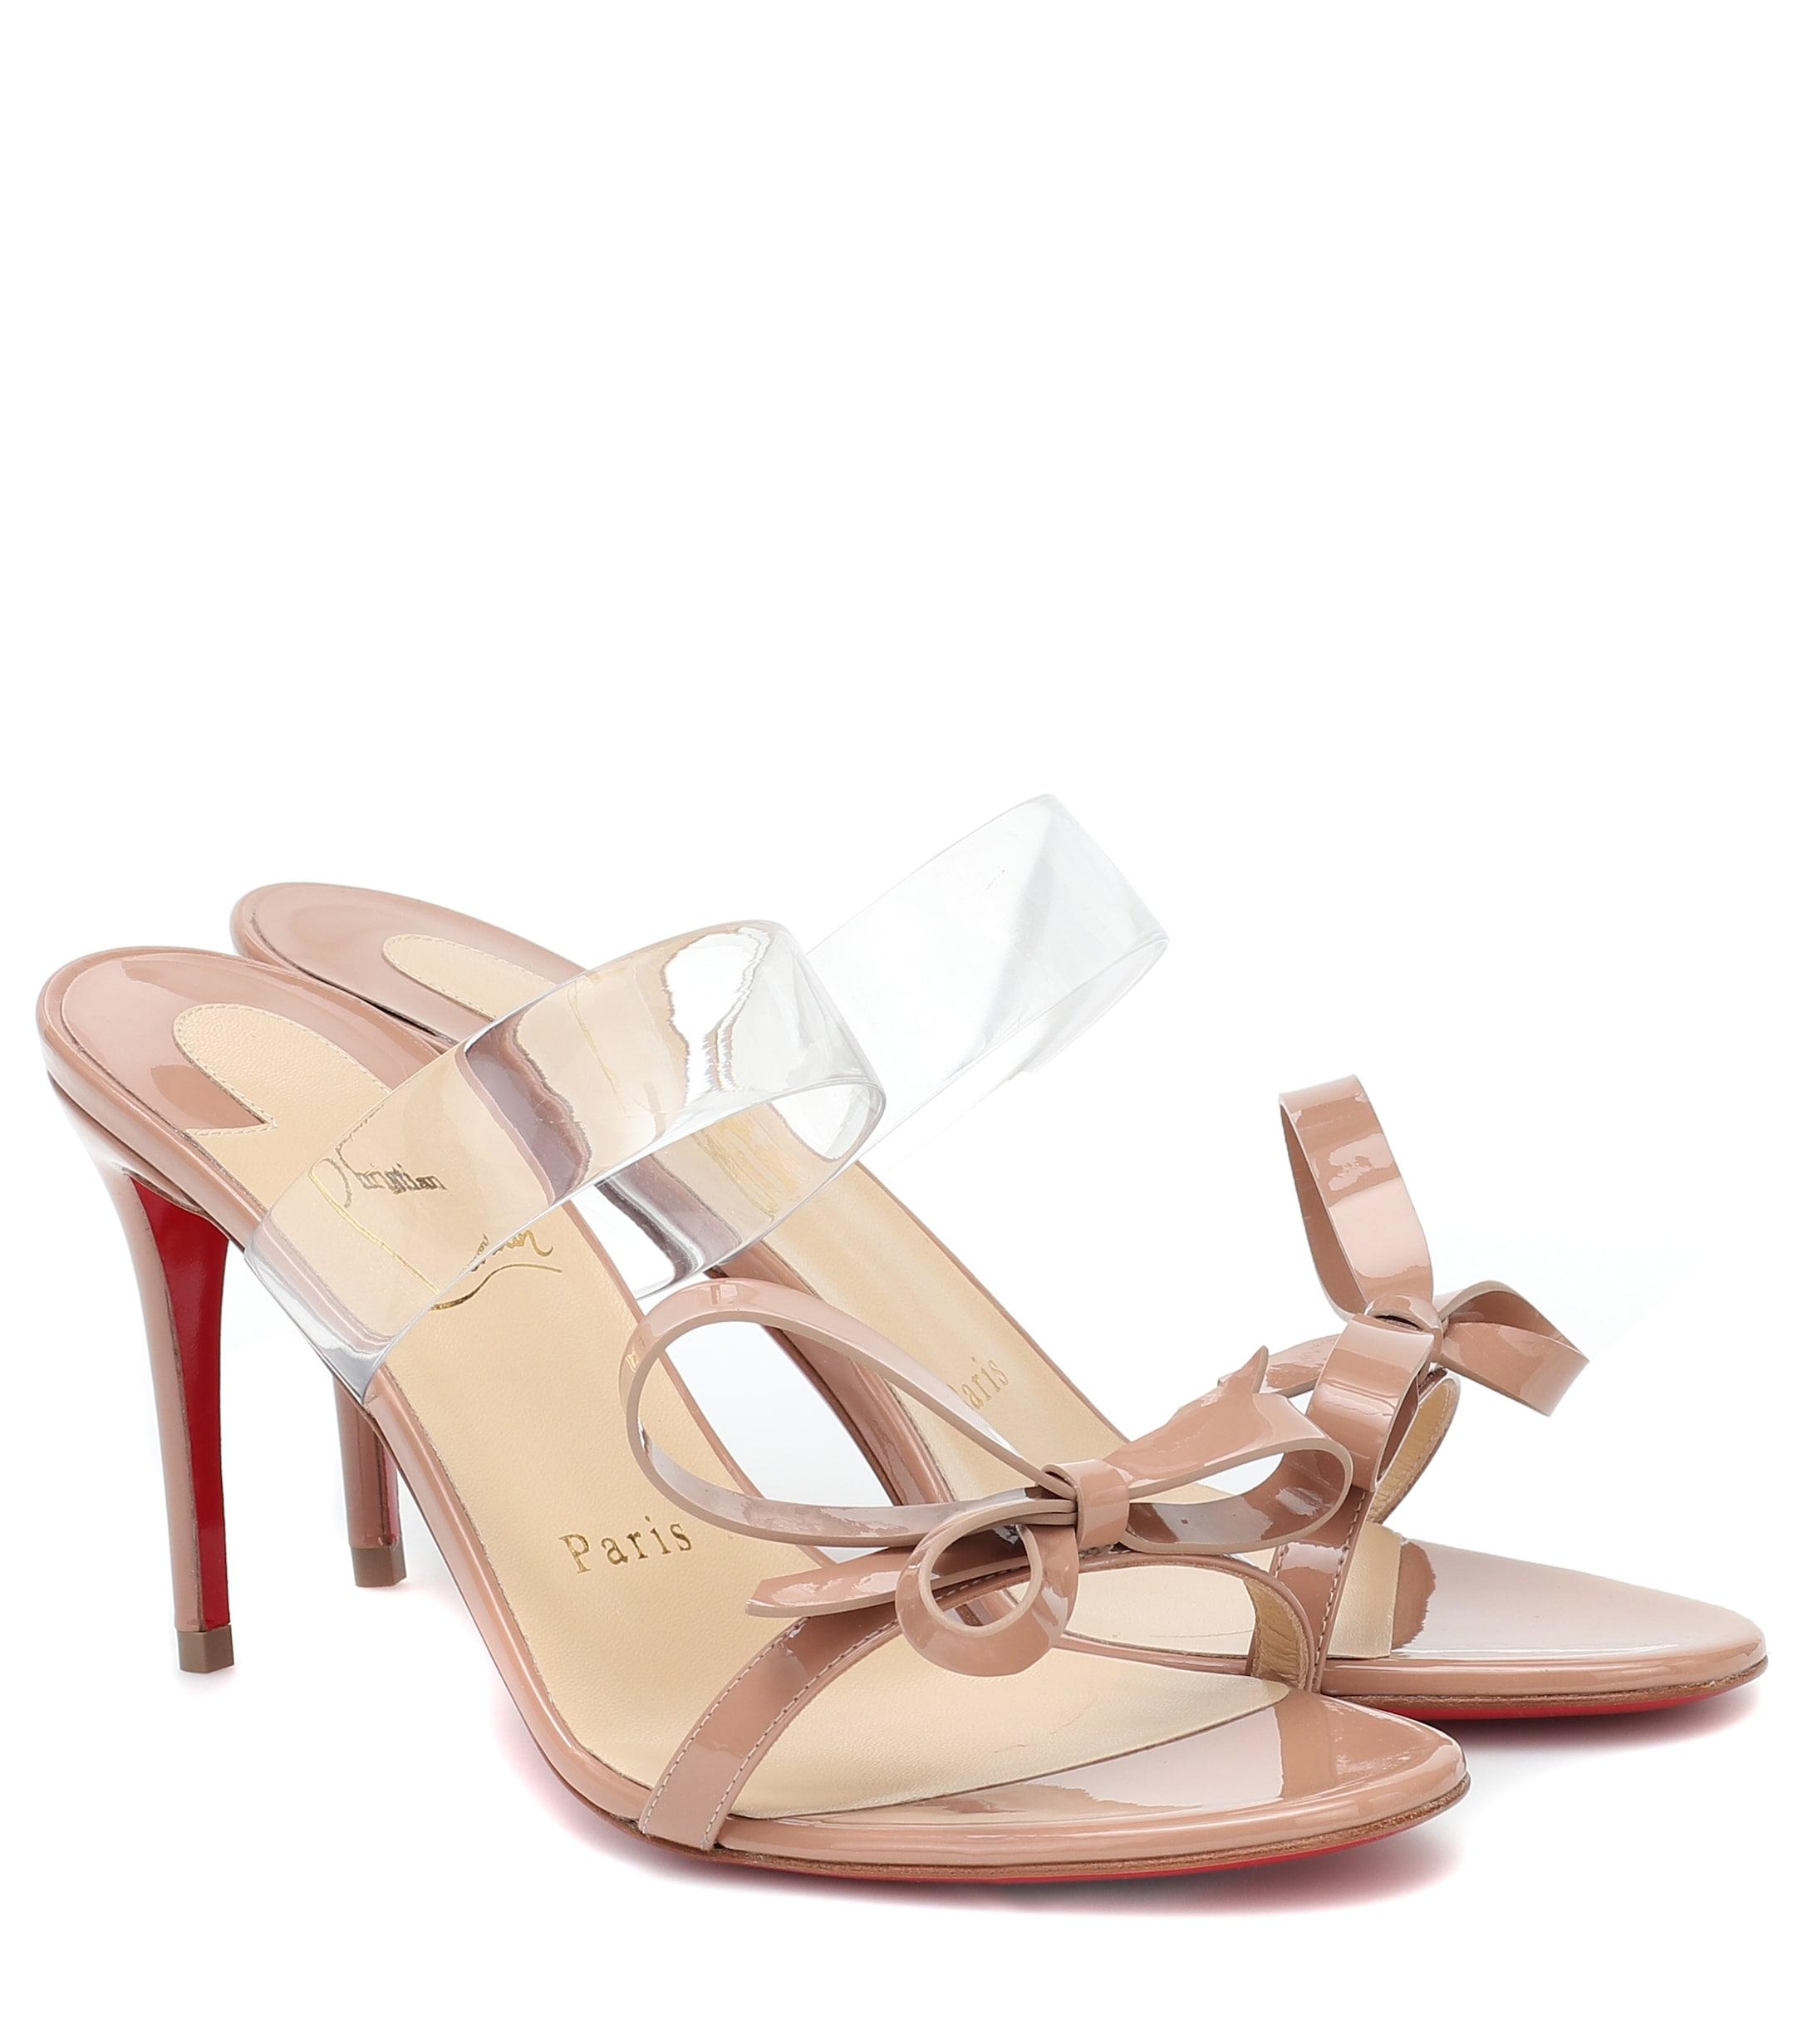 Christian Louboutin Just Nothing 85 Nude PVC - Women Shoes